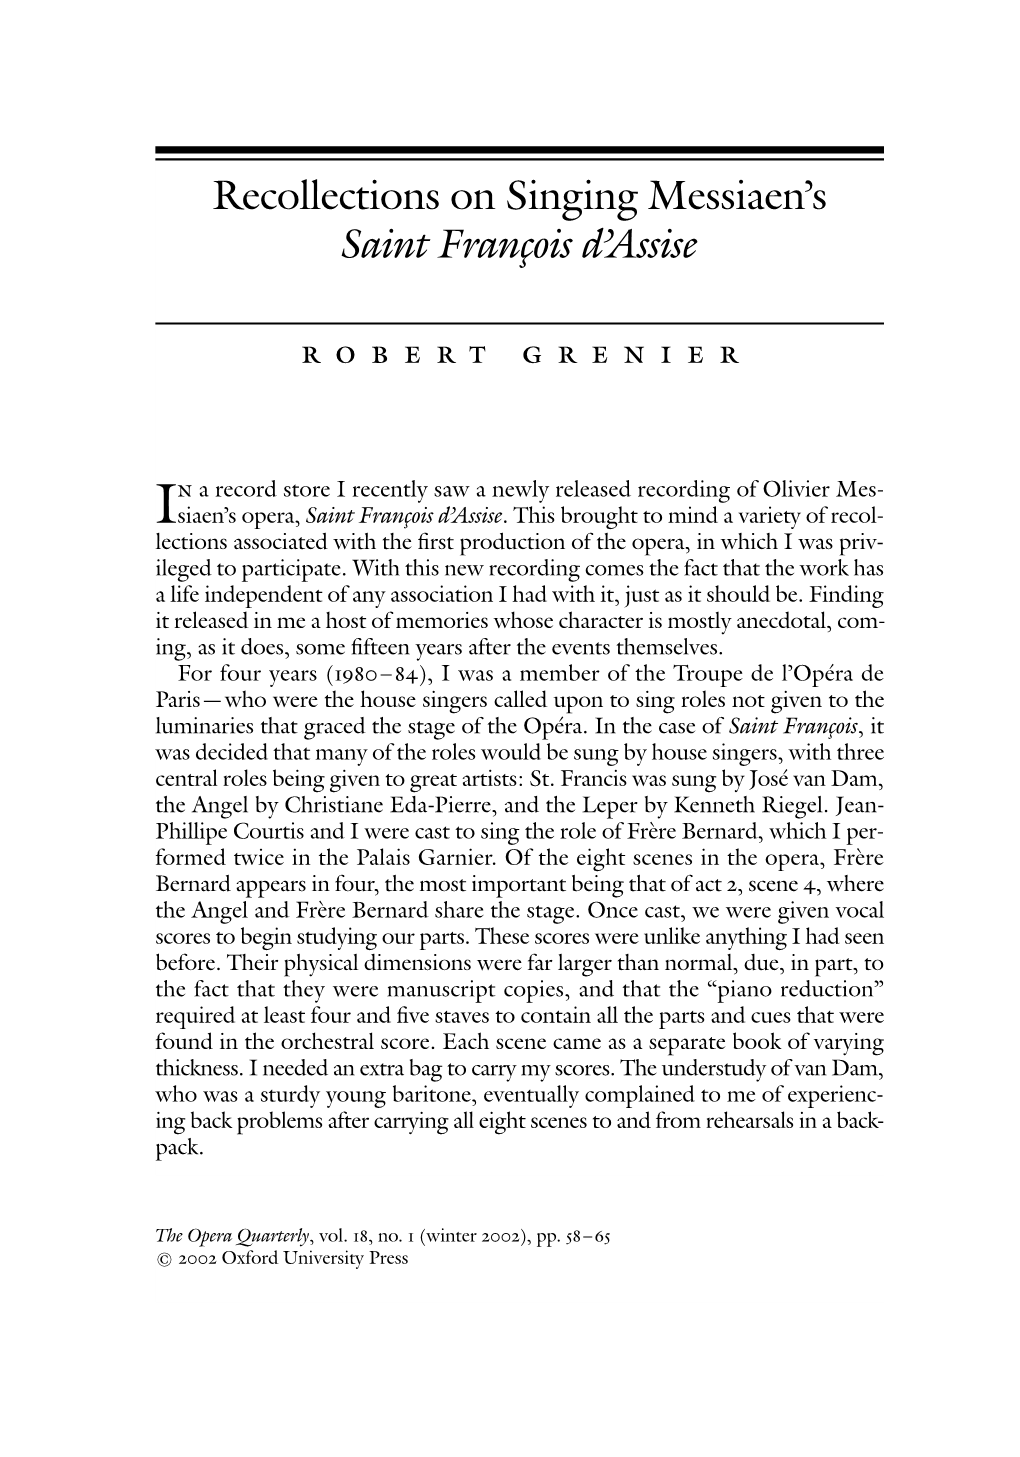 Recollections on Singing Messiaen's Saint Francois D'assise